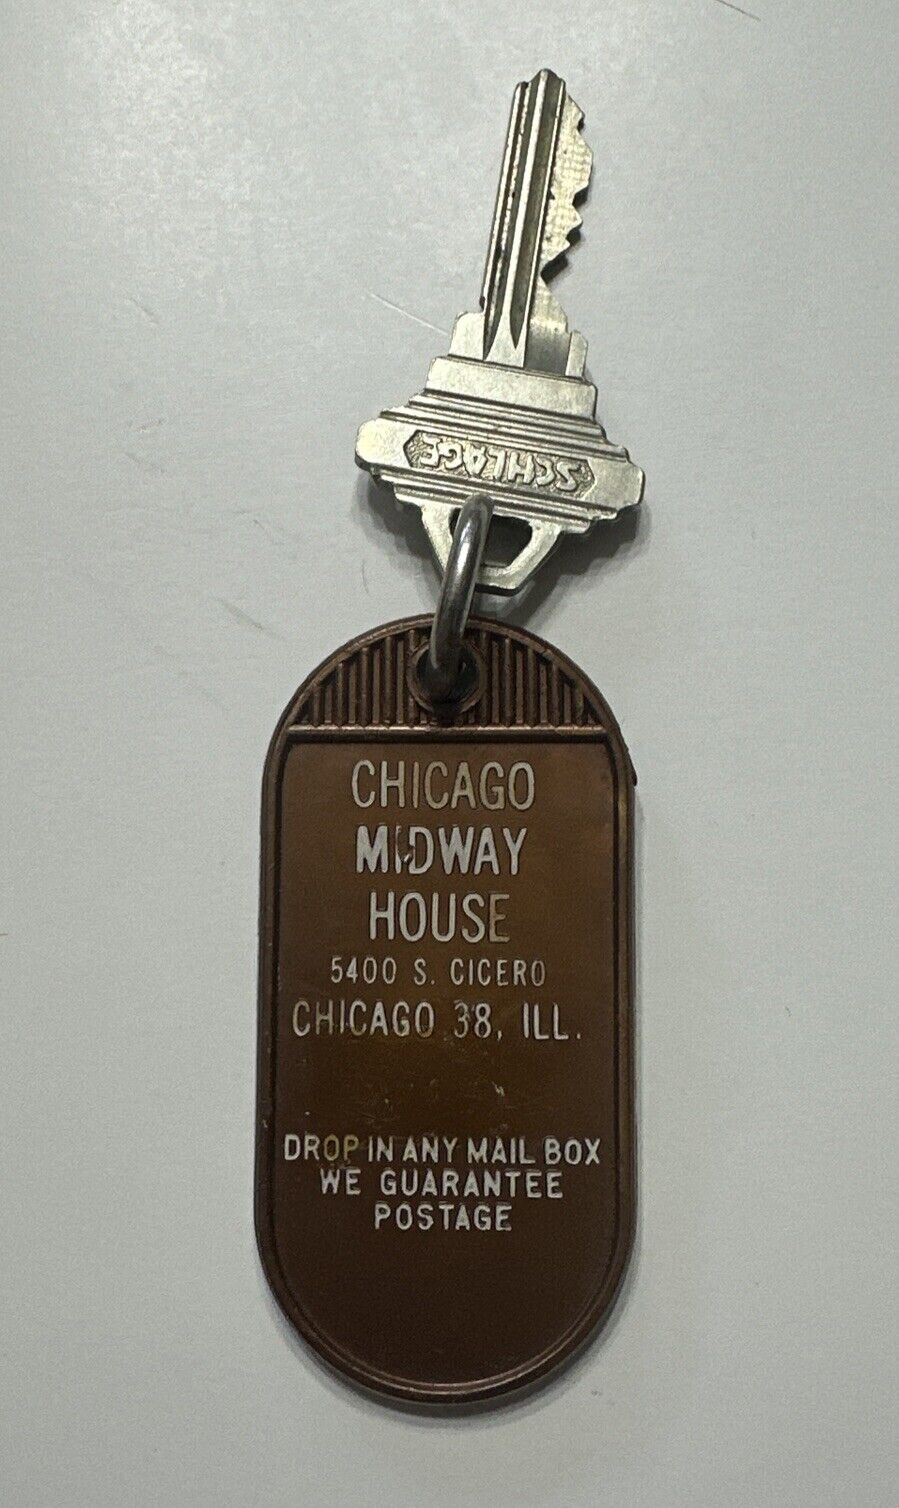 Chicago Midway House Hotel Room Key And Fob Chicago IL